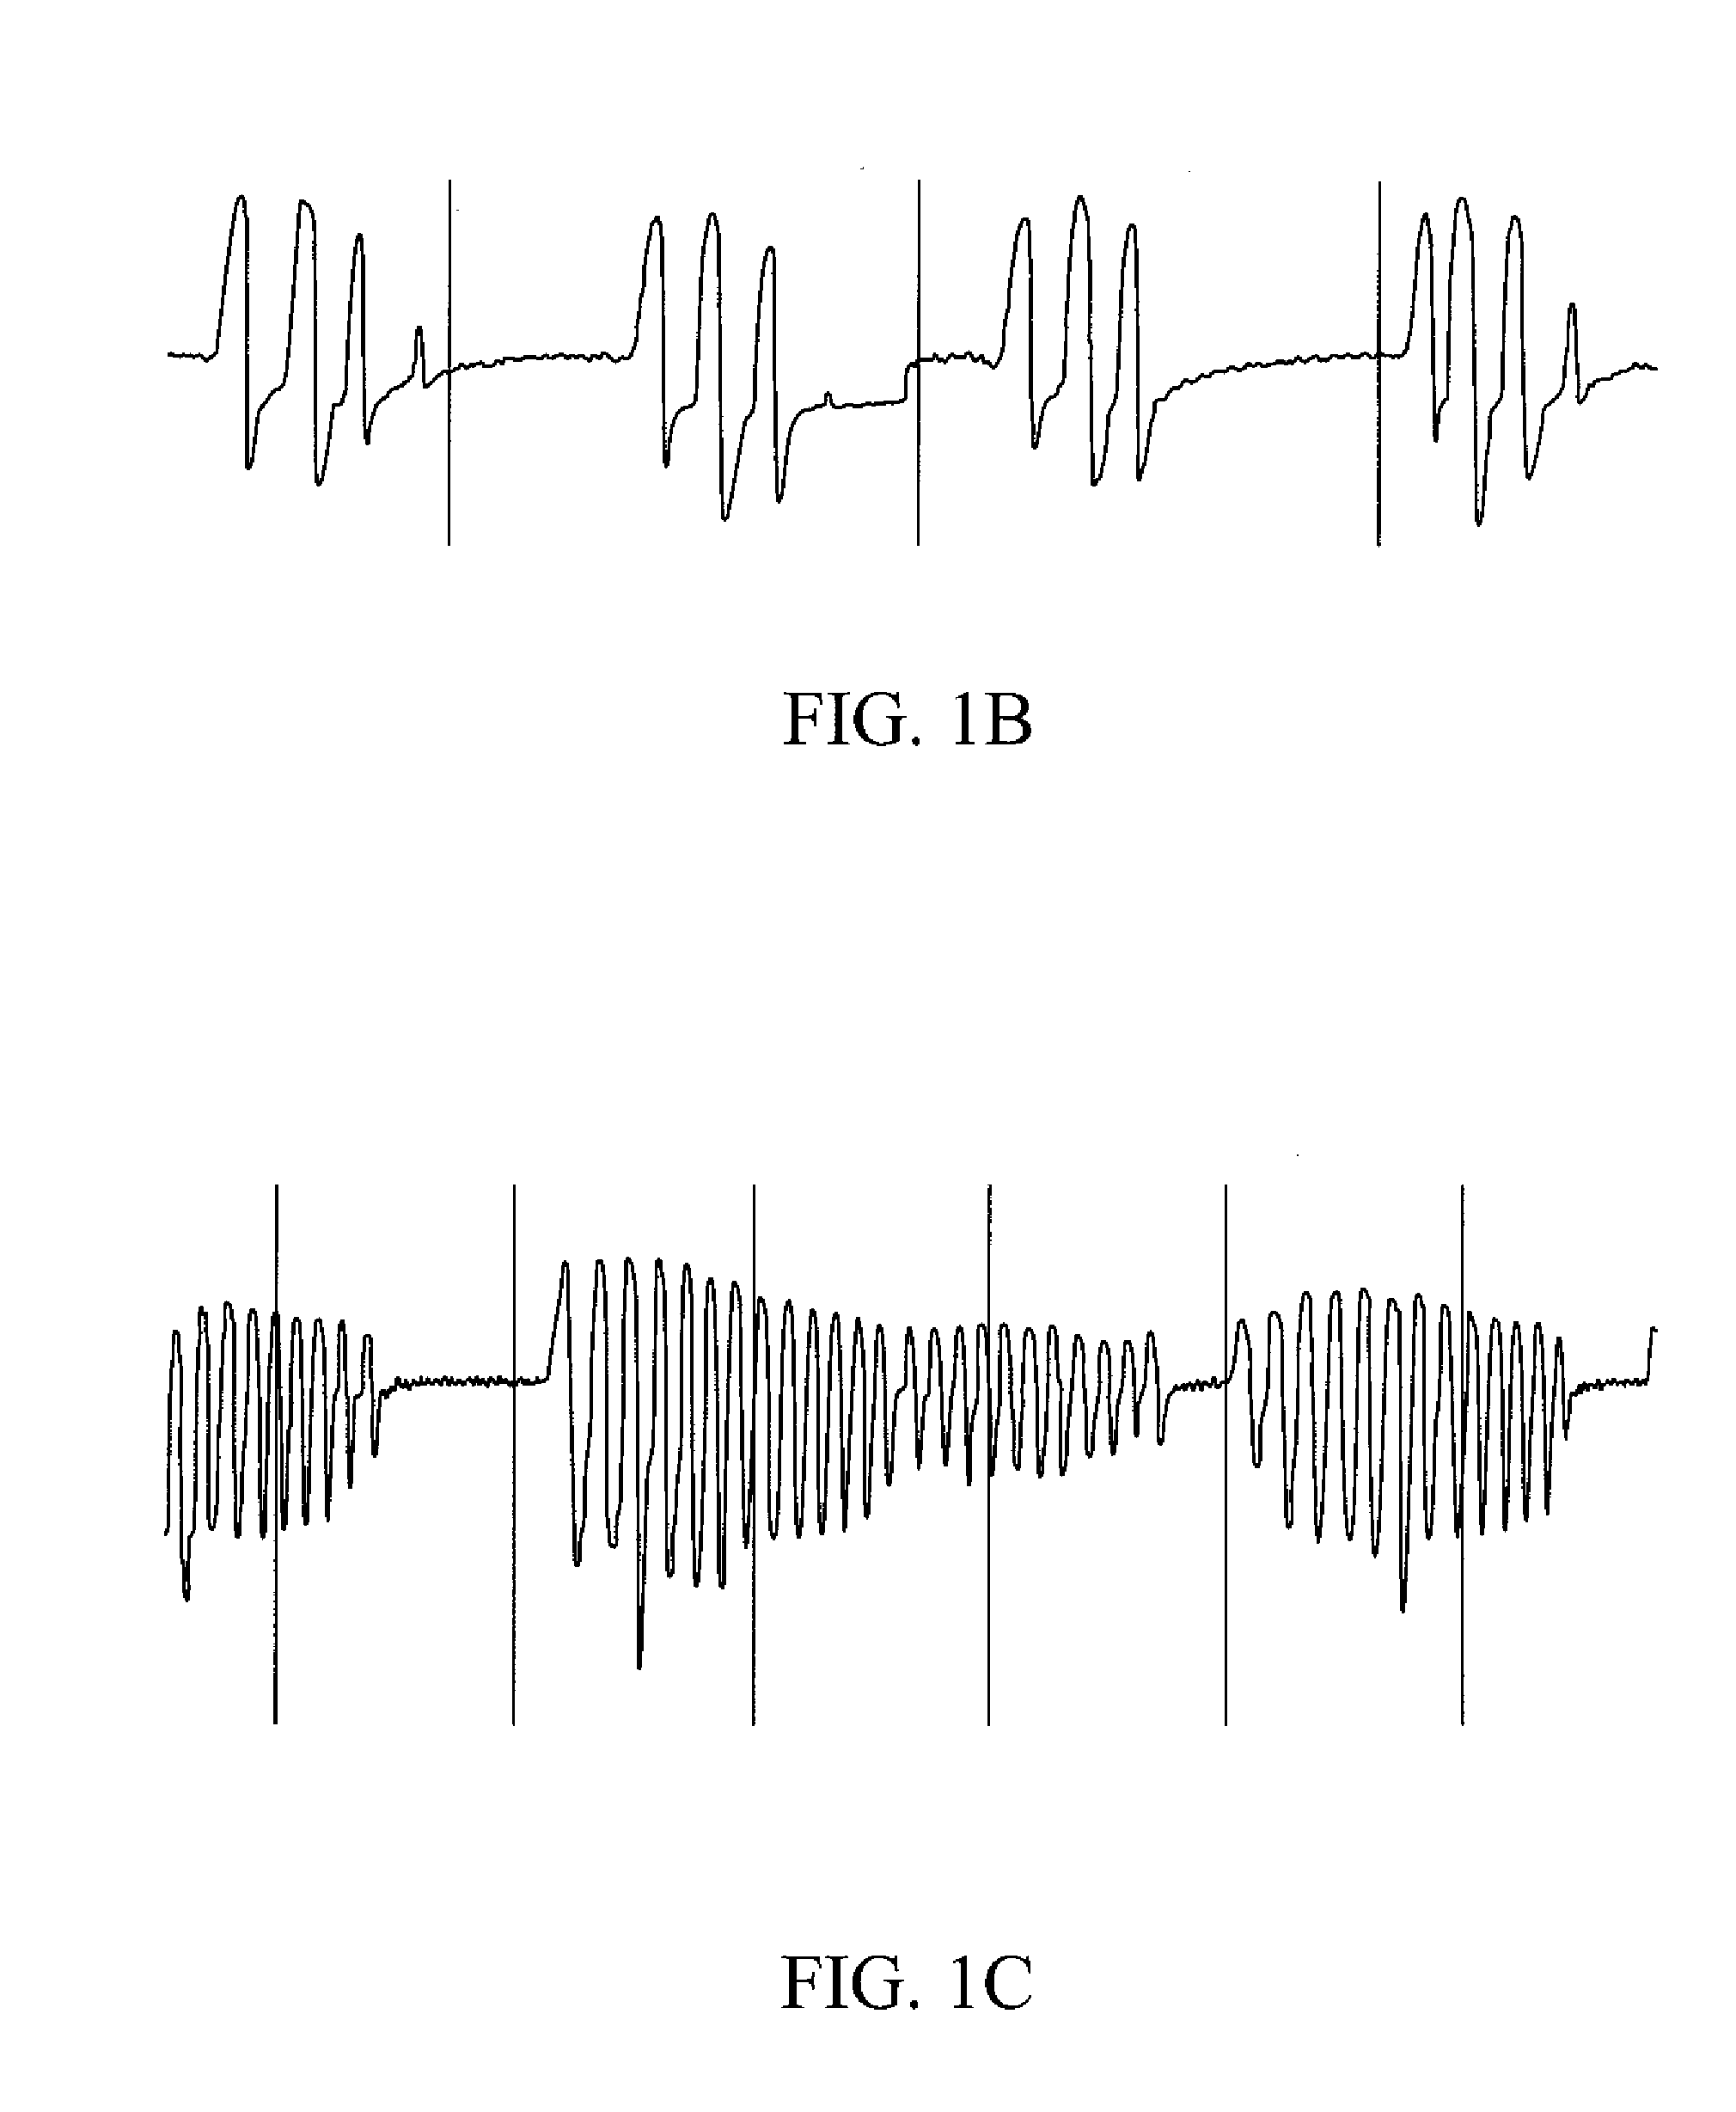 System and Method for Treating Ventilatory Instability